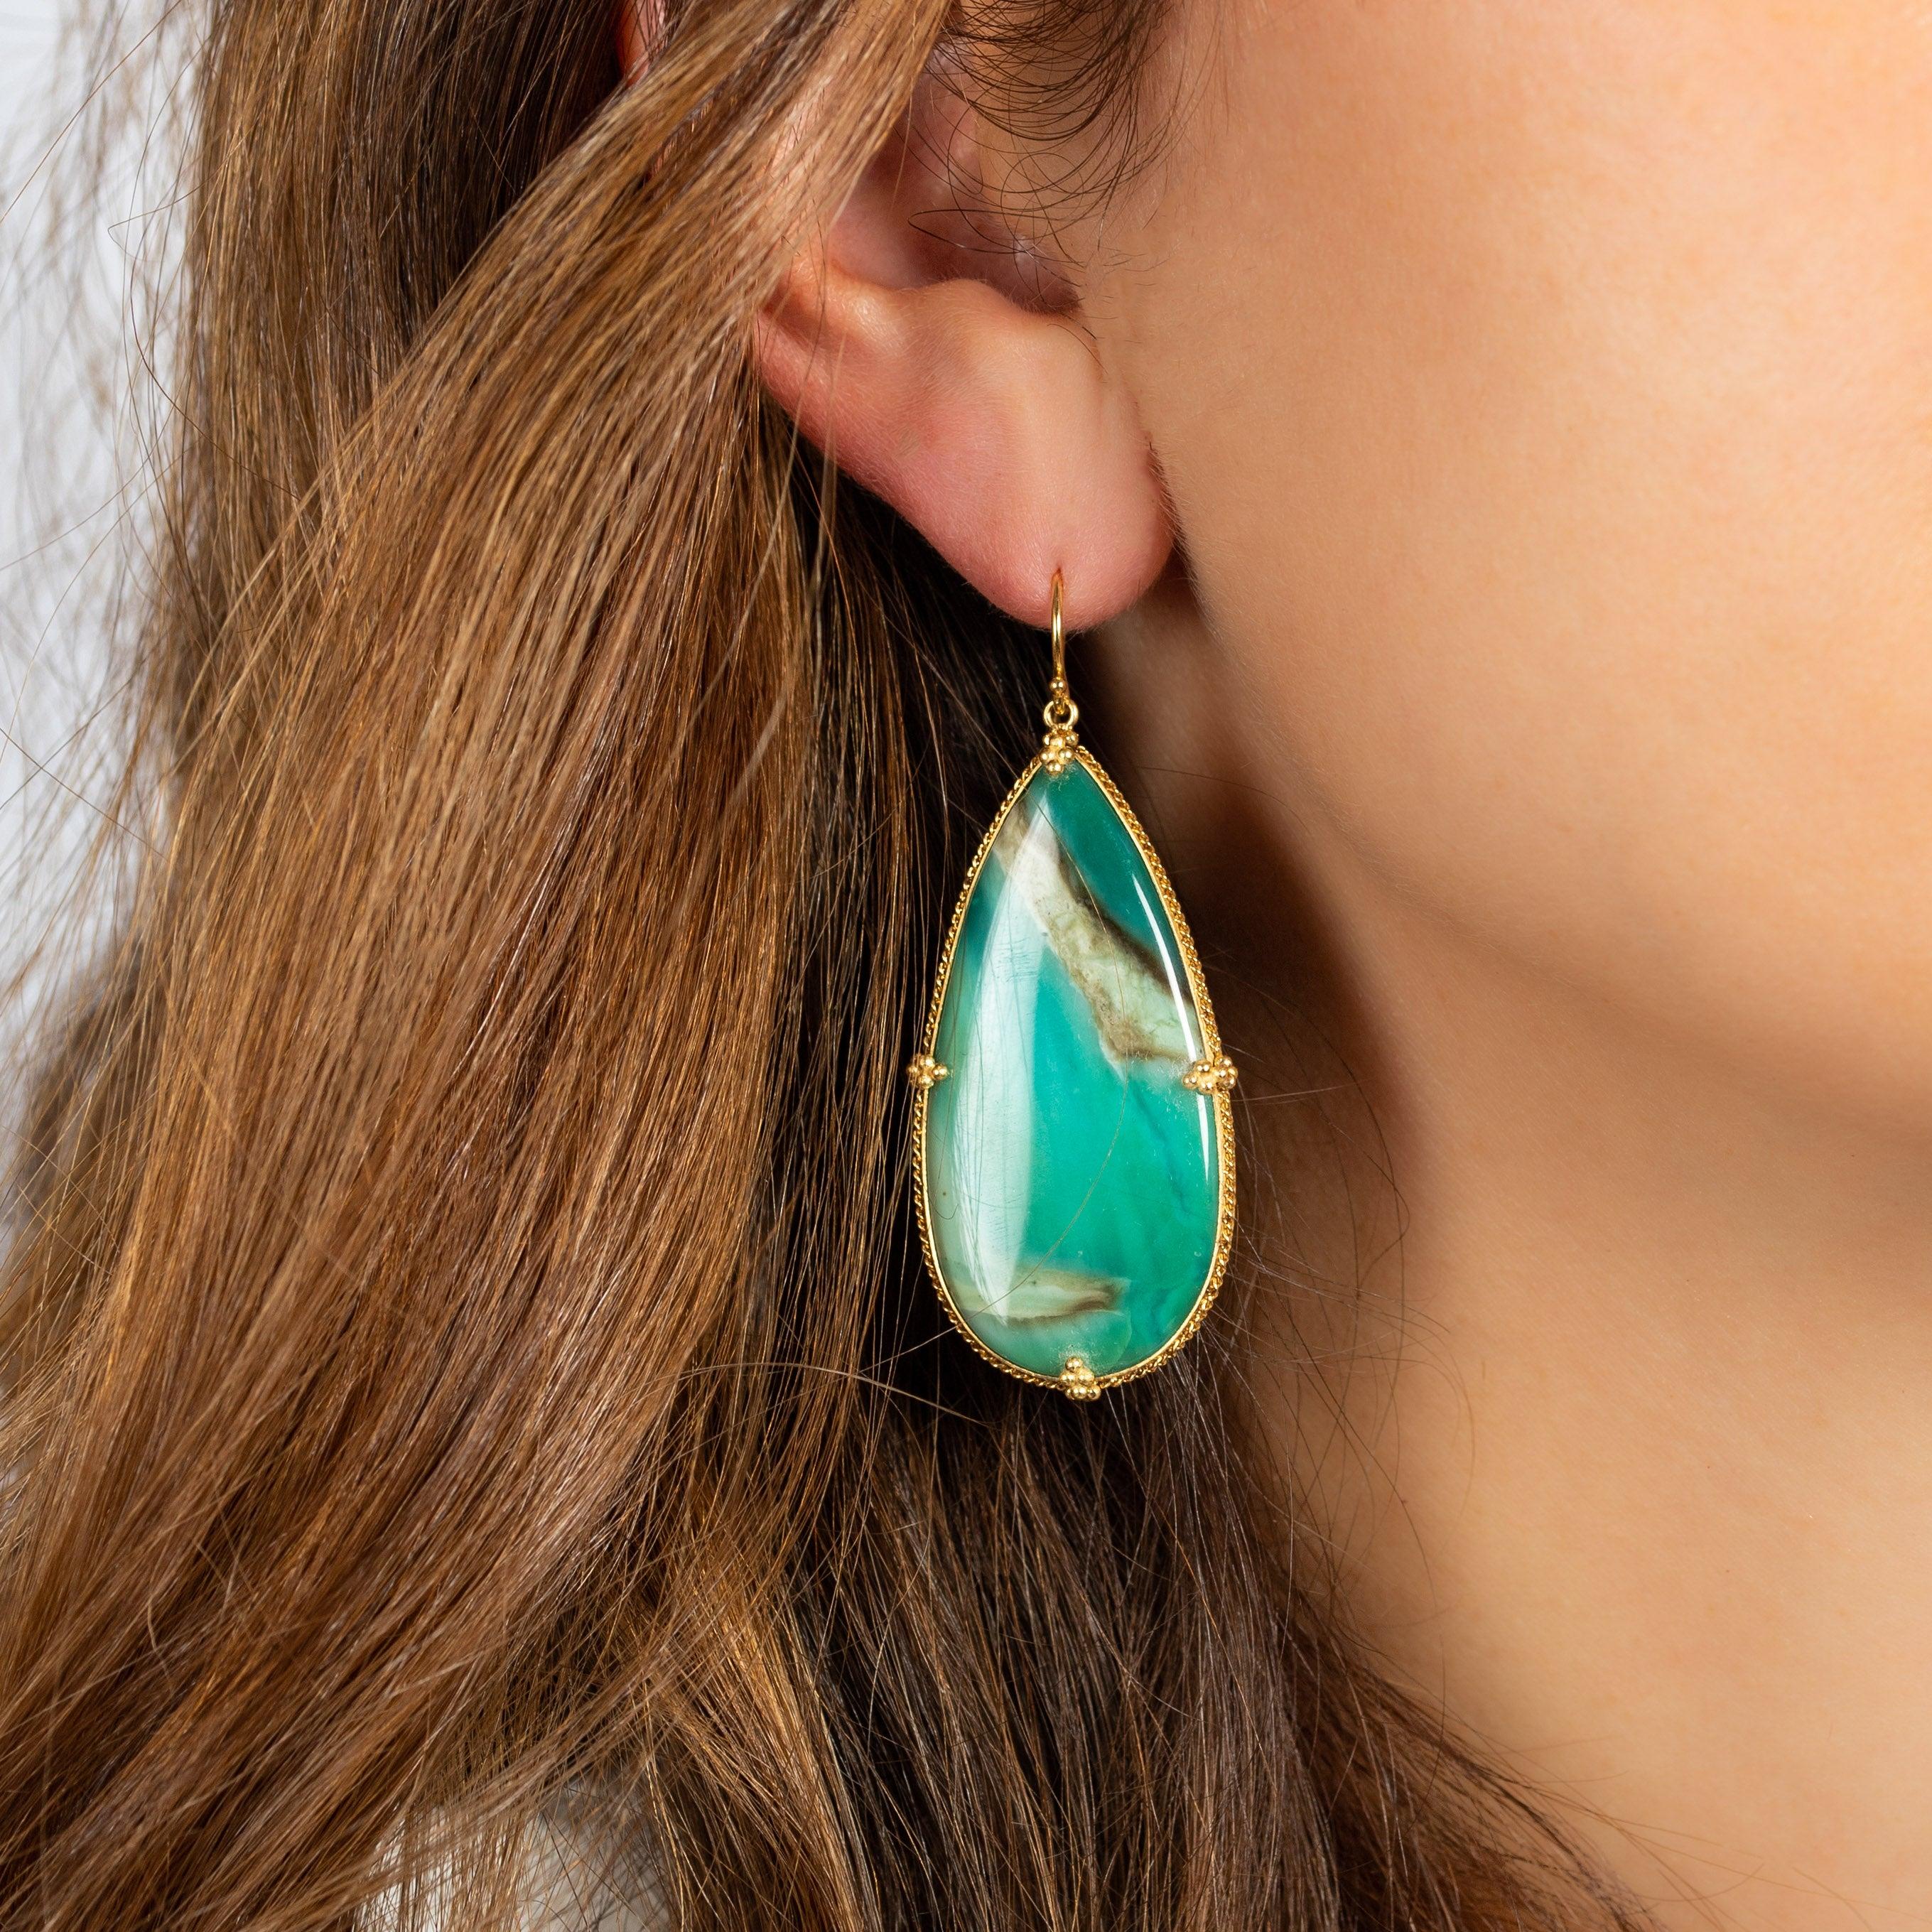 These spectacular earrings feature large and luscious teardrops of Petrified Wood with Blue Opal. It’s a distinctive and unusual material, a captivating stone the color of a tropical lagoon shot through with bands of shadow and light. These